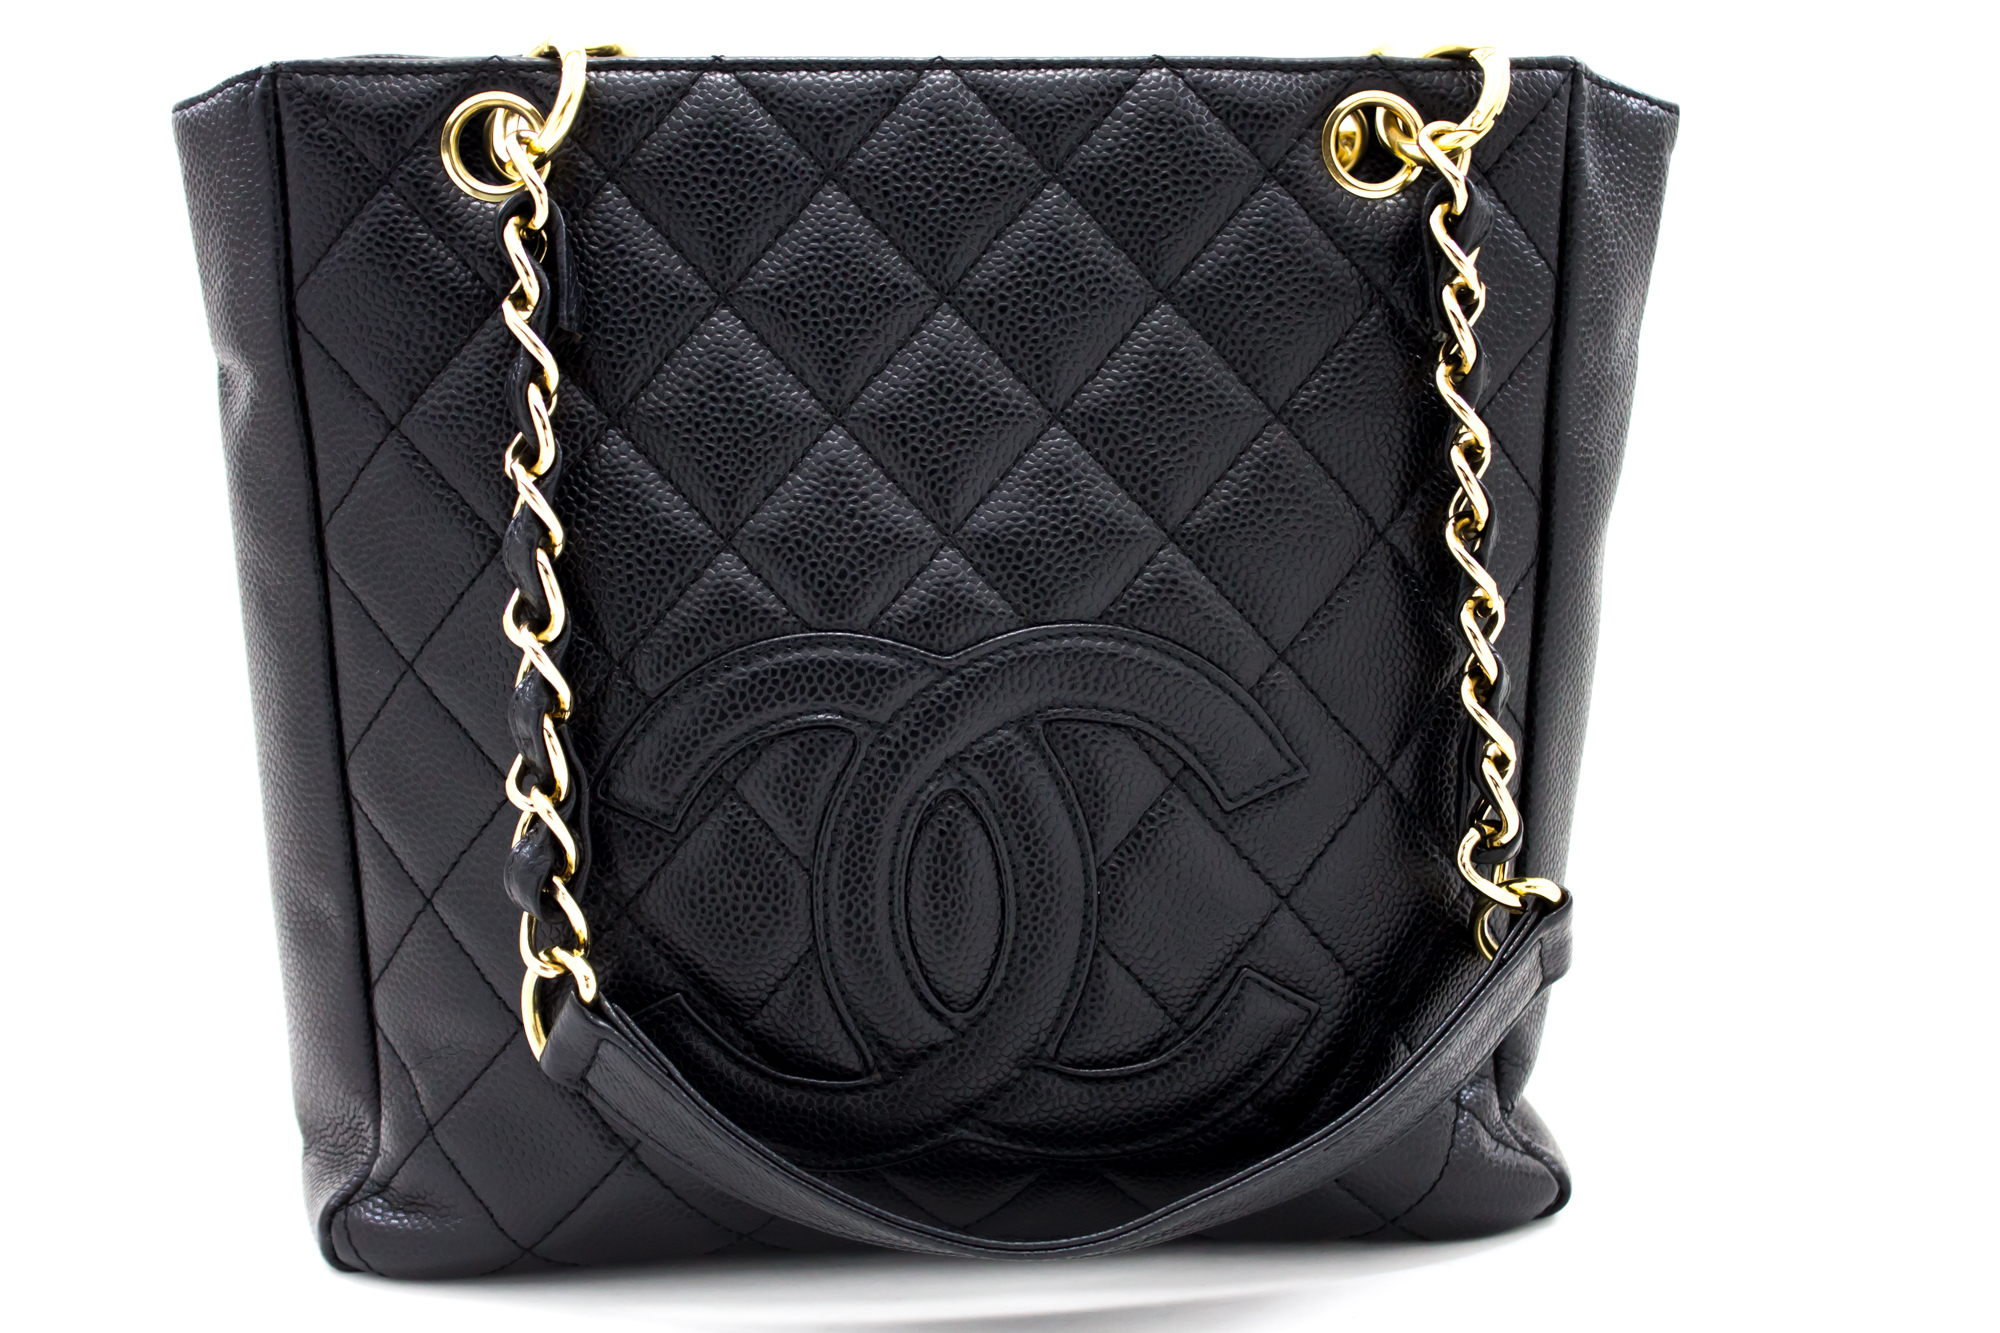 CHANEL Caviar PST Chain Shoulder Bag Shopping Tote Black Quilted t35 | eBay